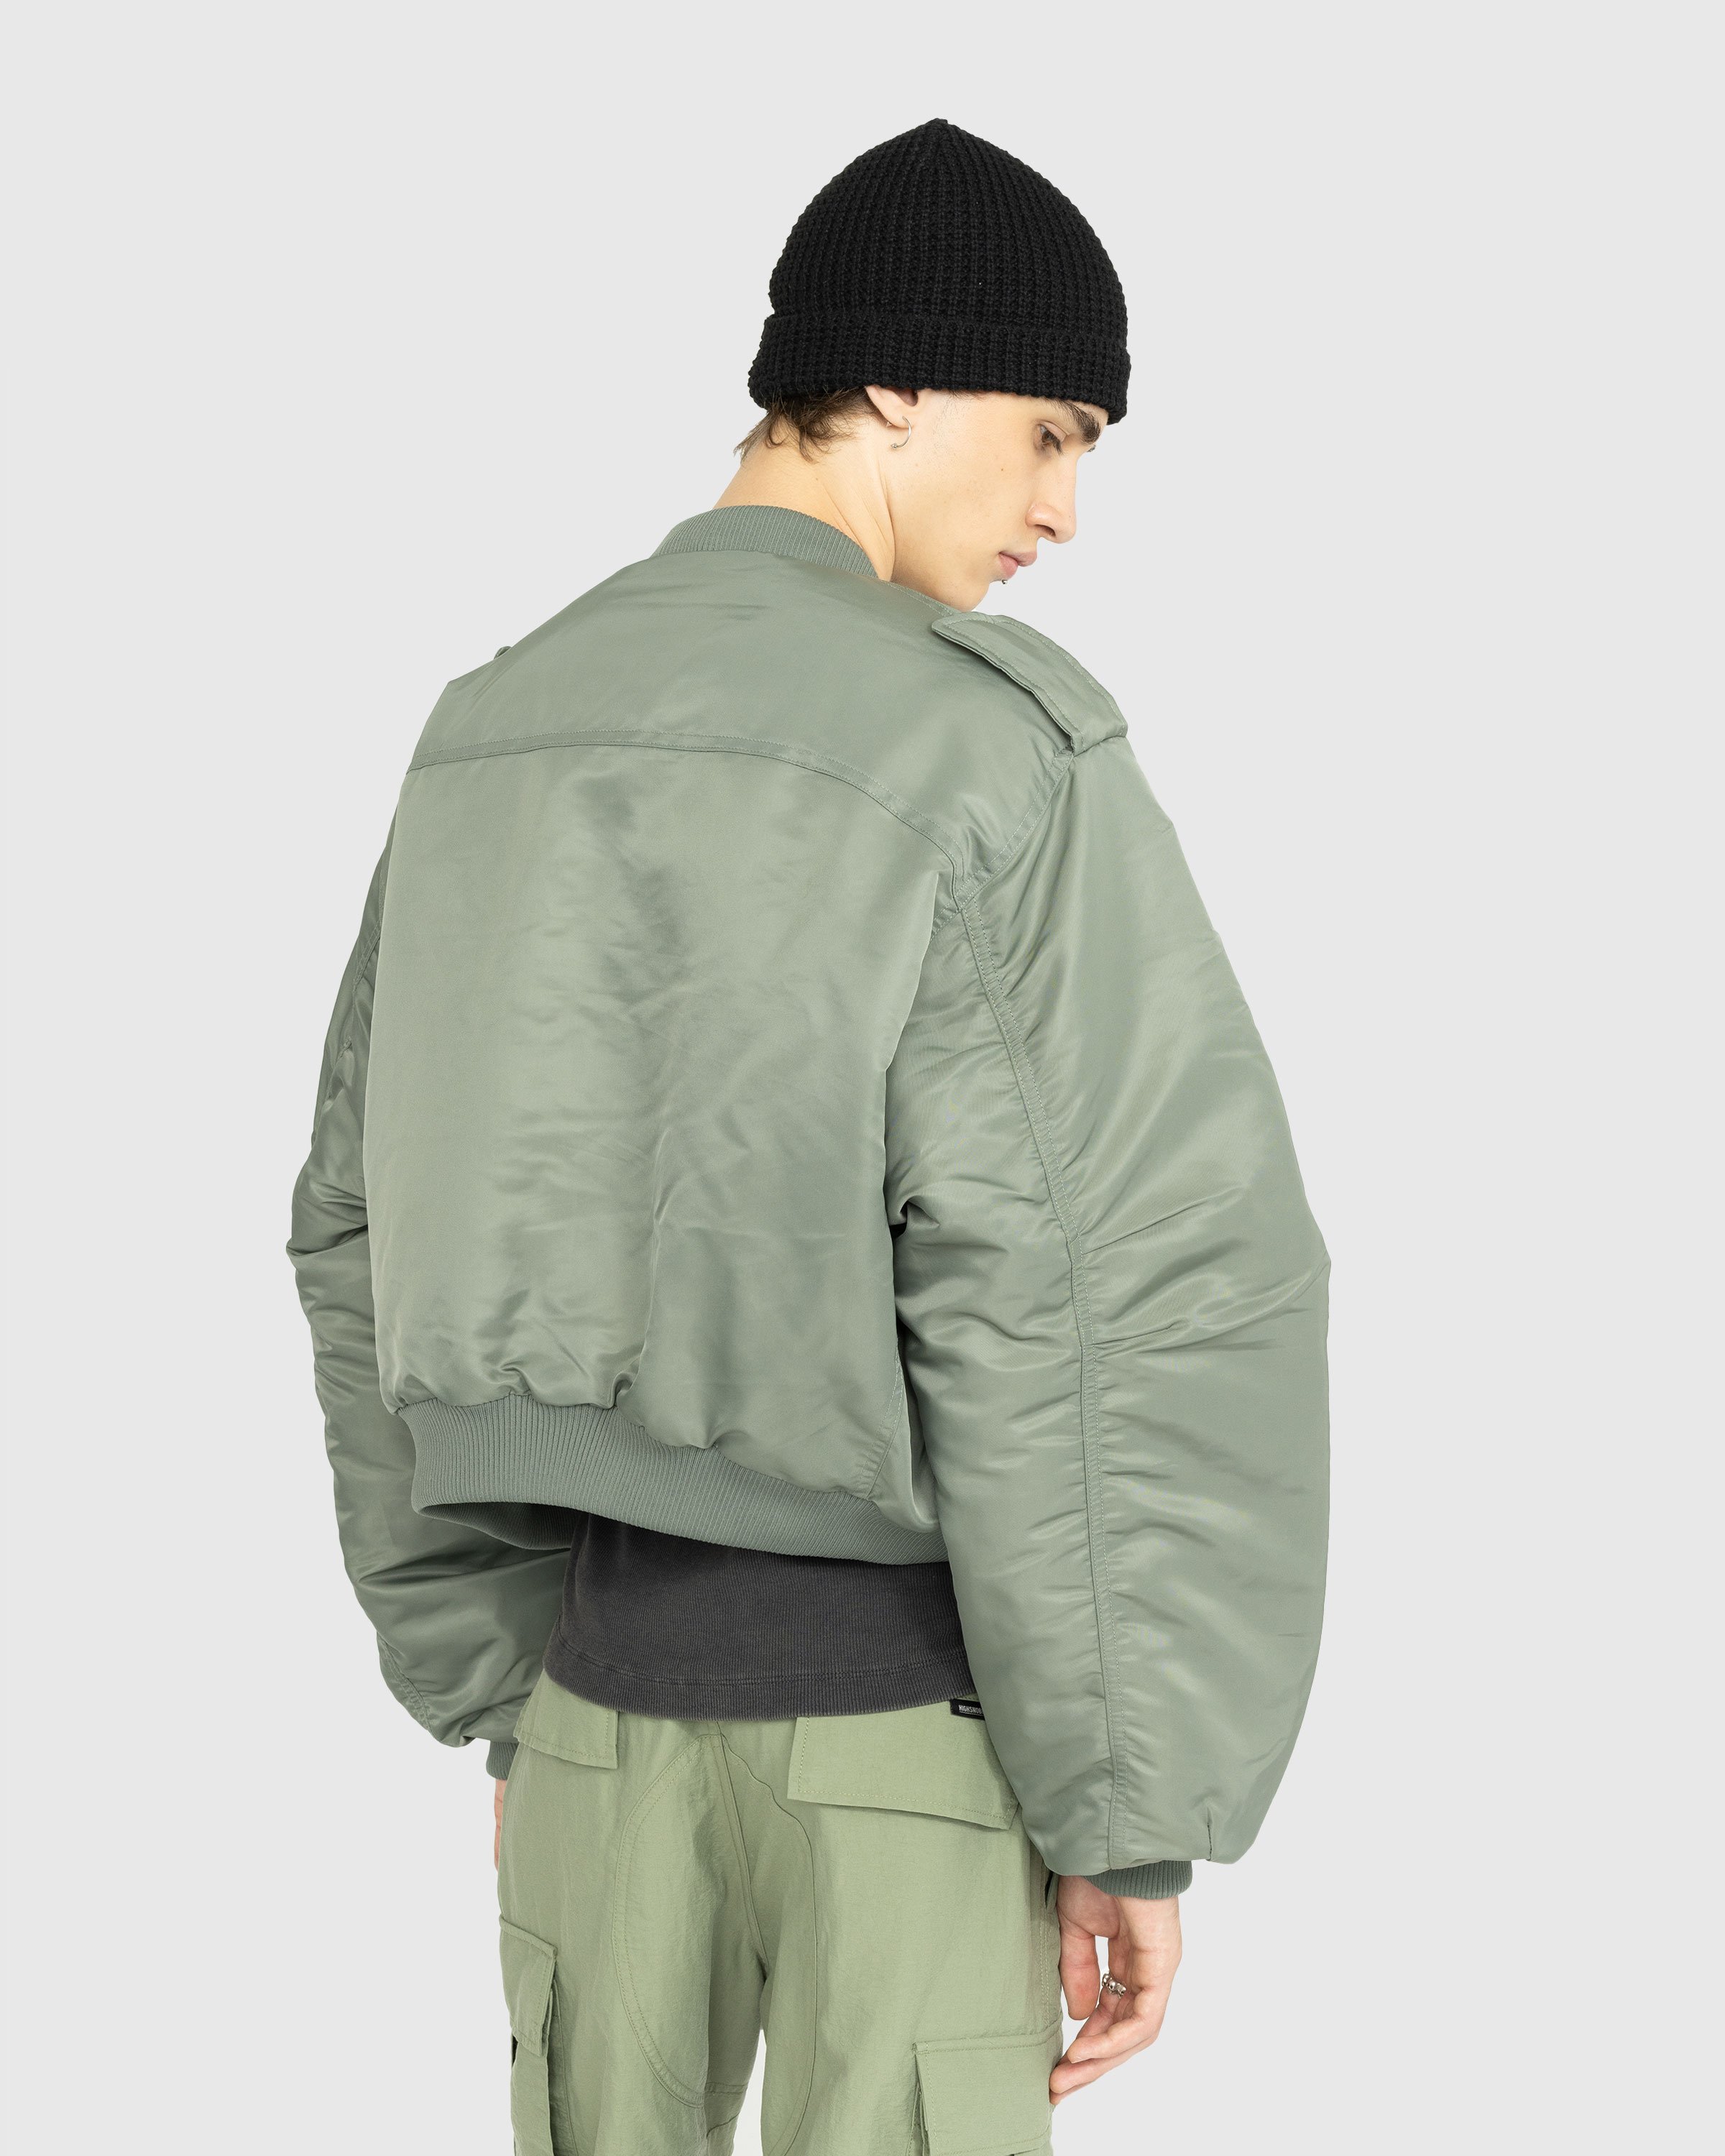 Entire Studios - A-2 Bomber Swamp - Clothing - Grey - Image 3